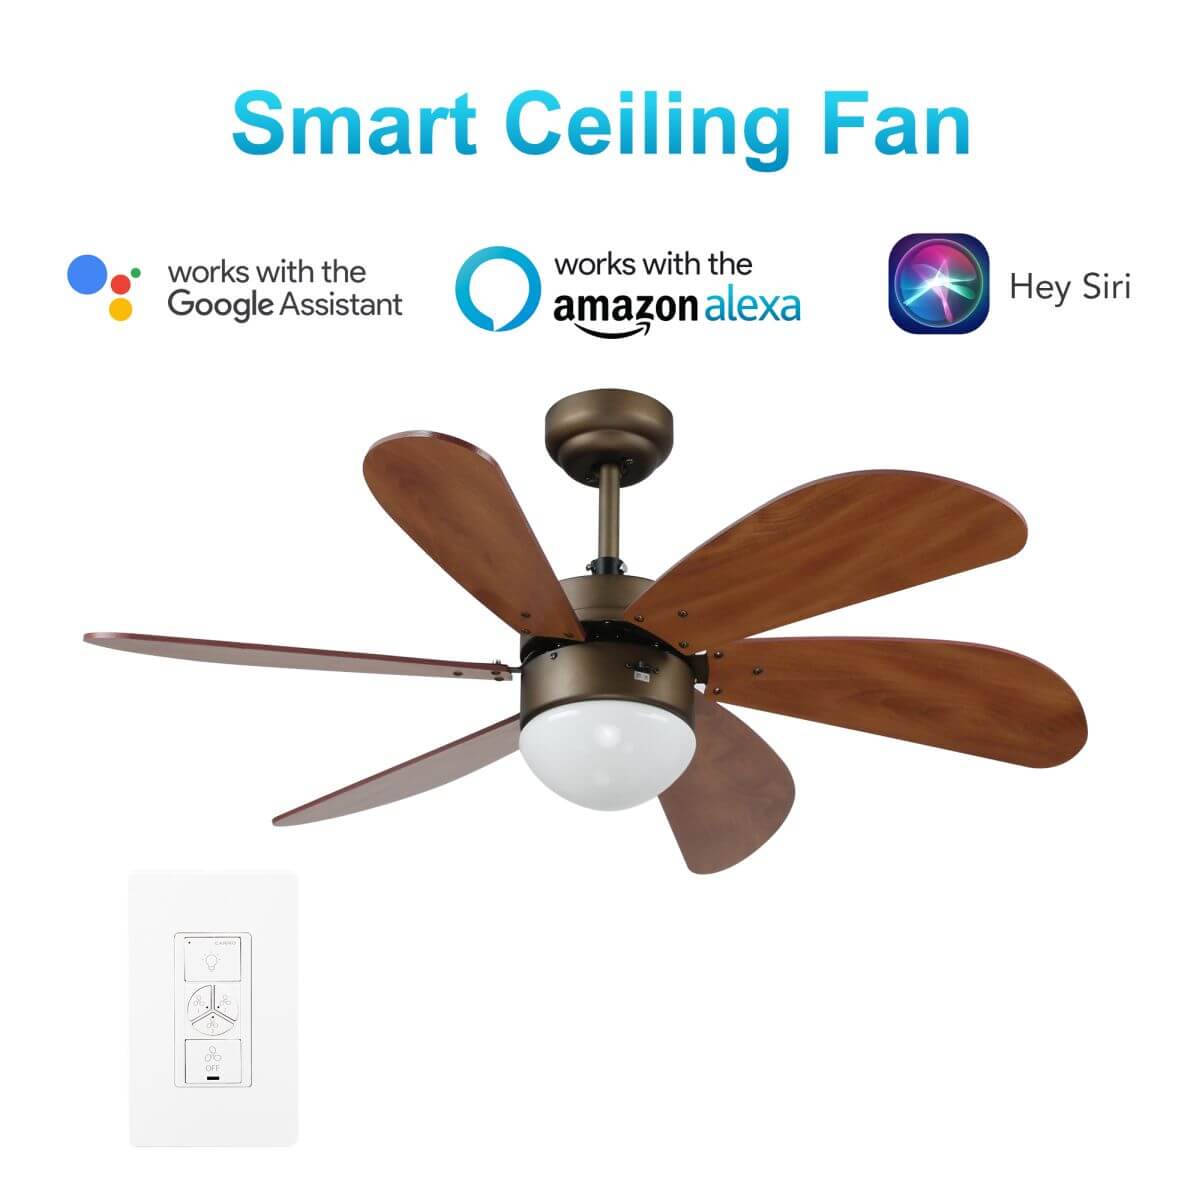 Minimus 38" In. 6 Blade Smart Ceiling Fan with LED Light Kit Works with Wall control, Wi-Fi apps and Voice control via Google Assistant/Alexa/Siri